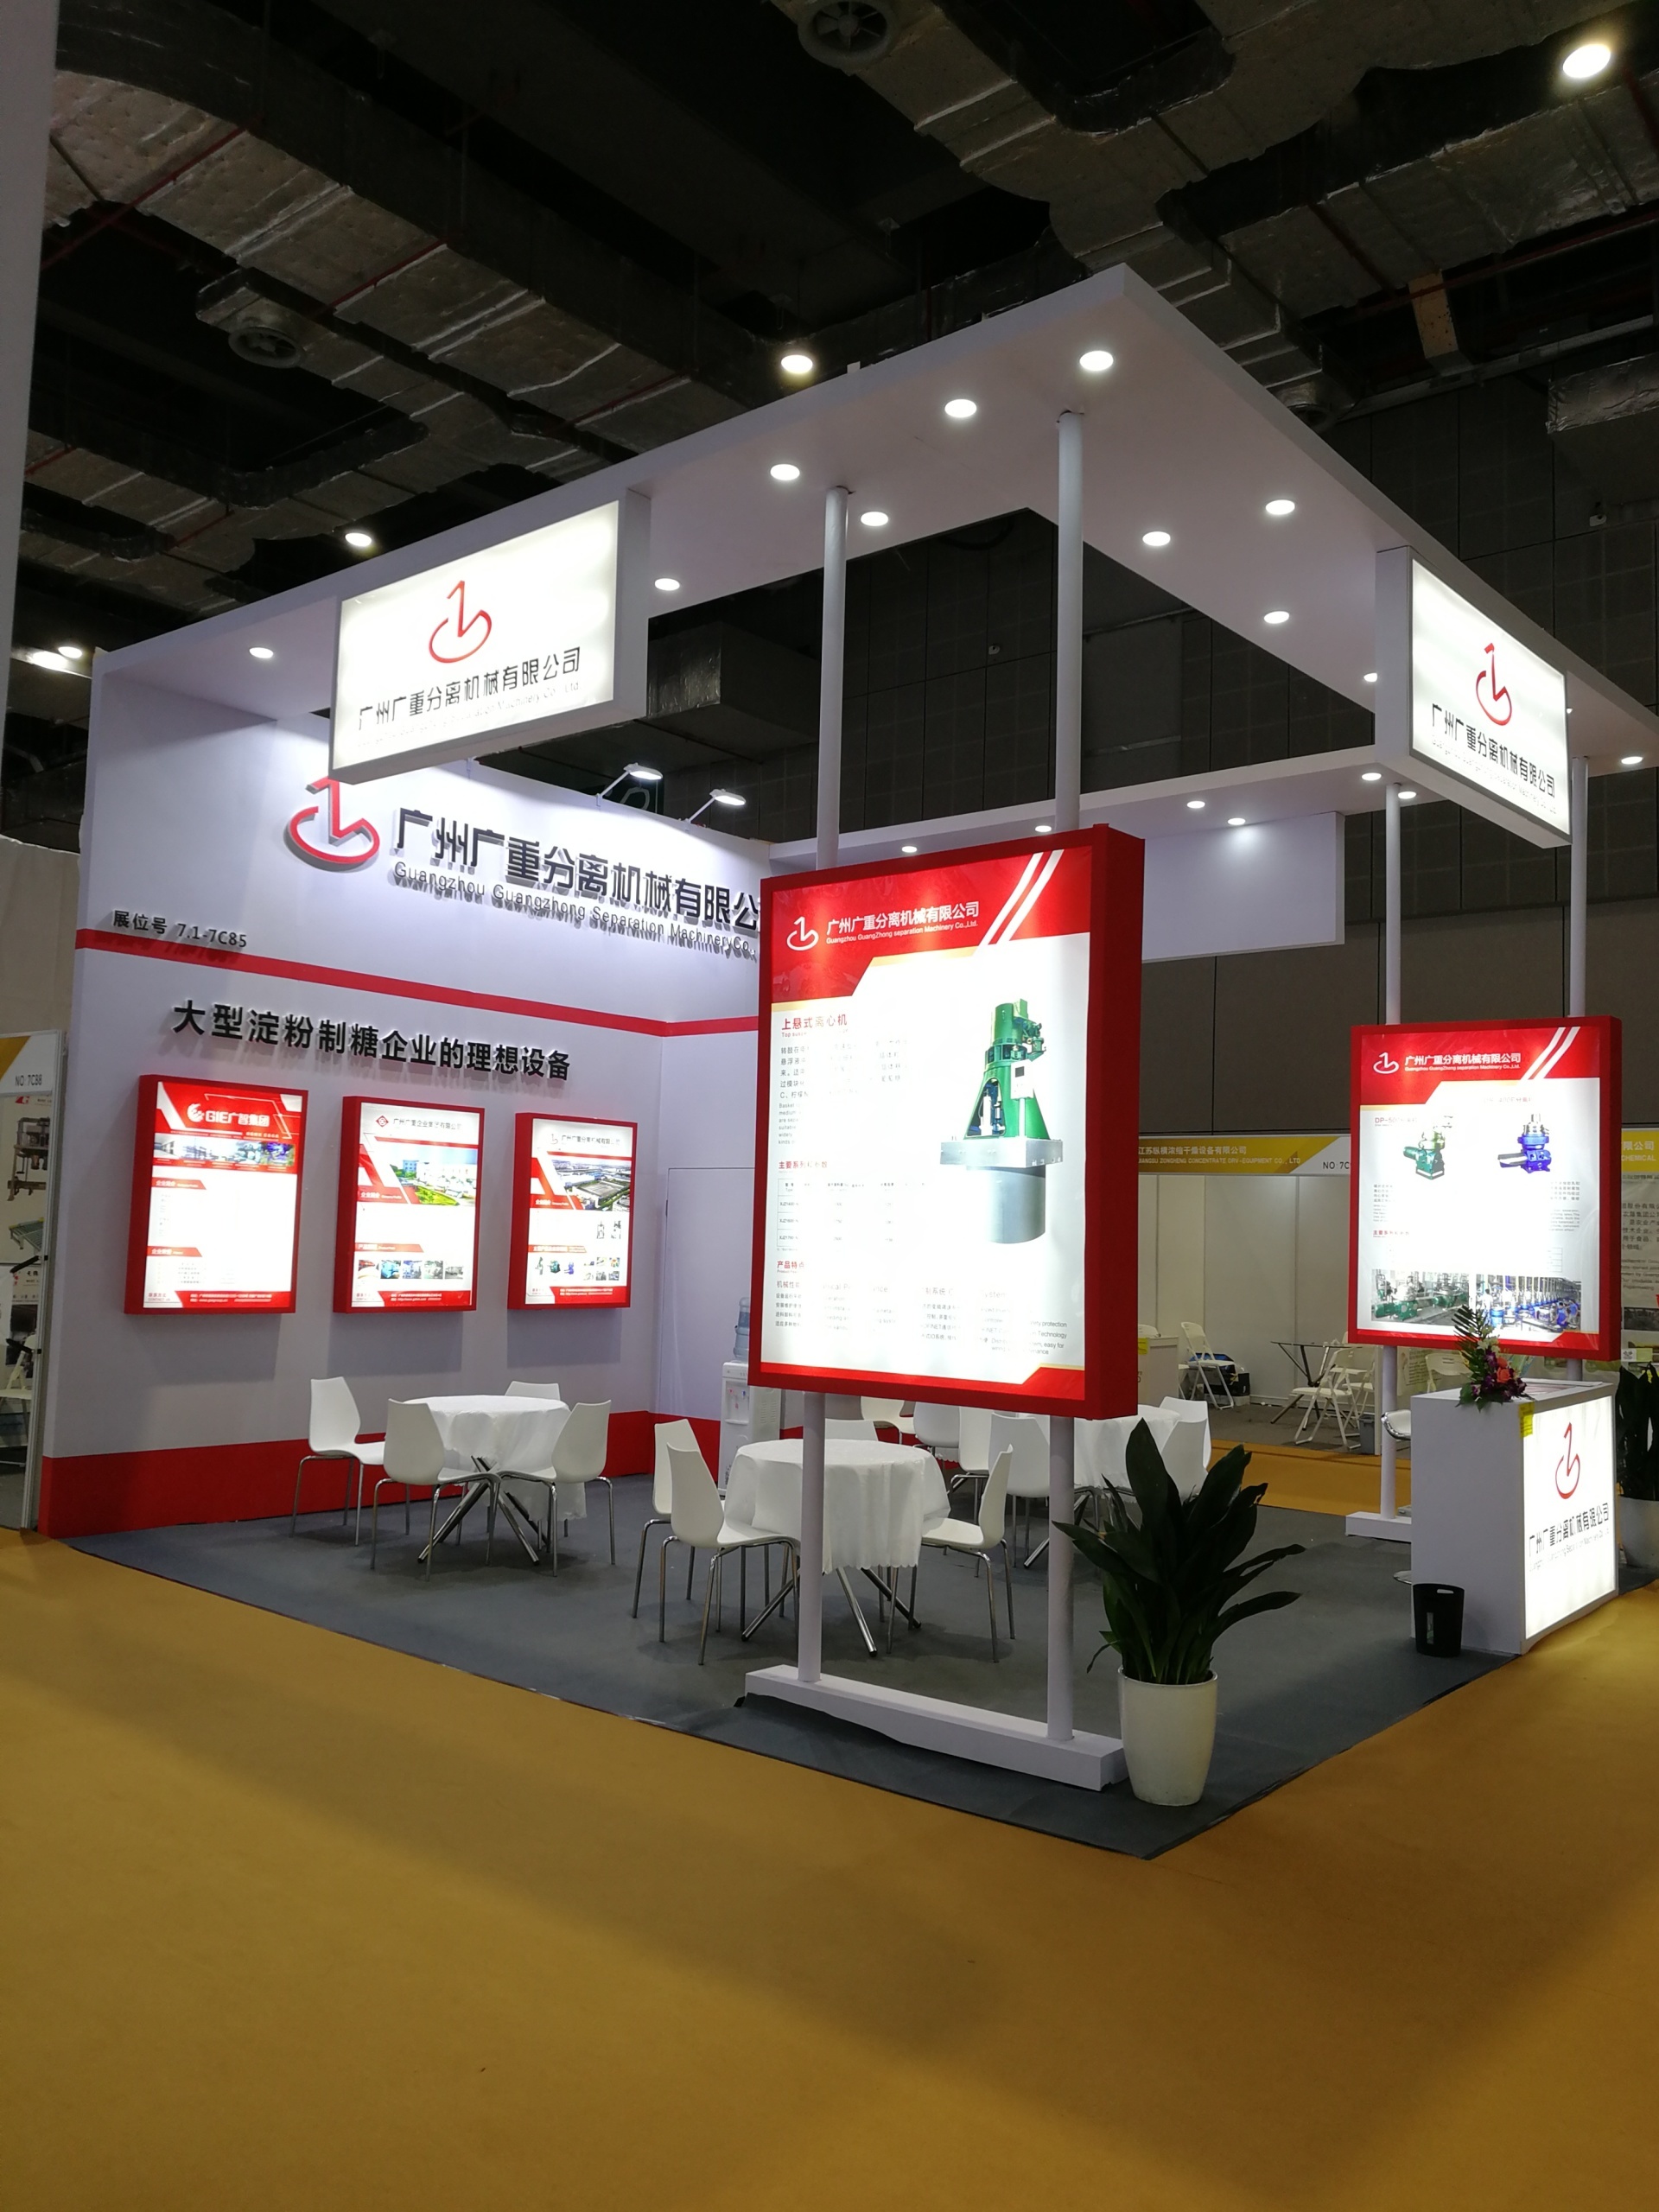 The 15th Shanghai International Starch and Starch Derivatives Exhibition